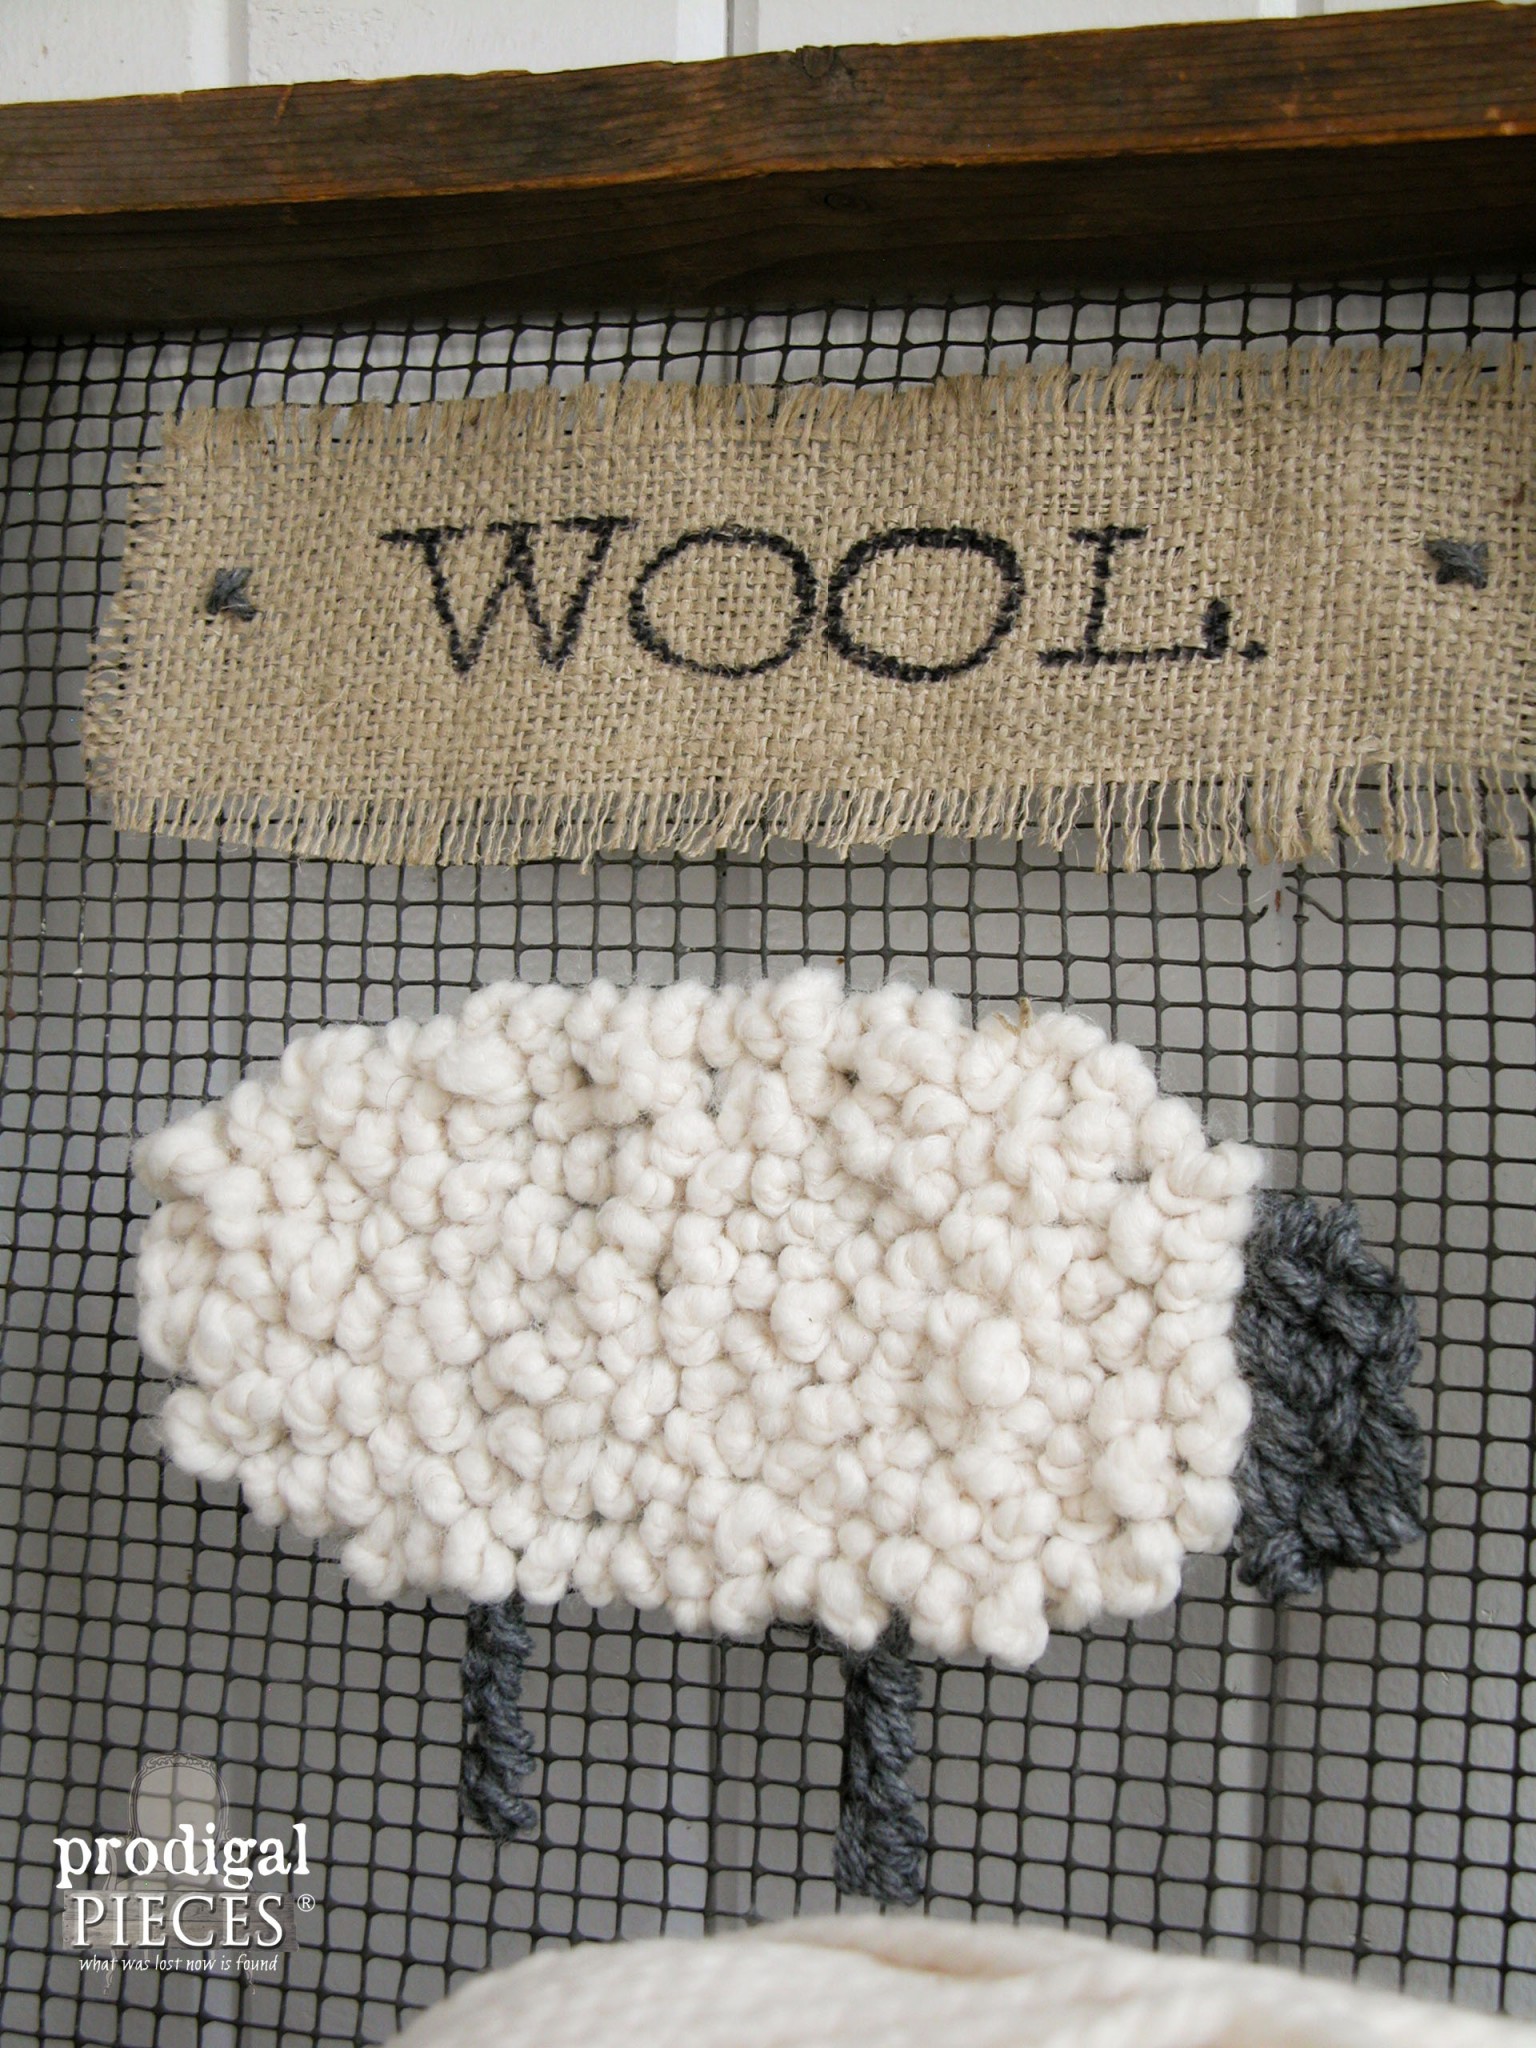 Rustic Wooly Sheep Repurposed Art by Prodigal Pieces | www.prodigalpieces.com